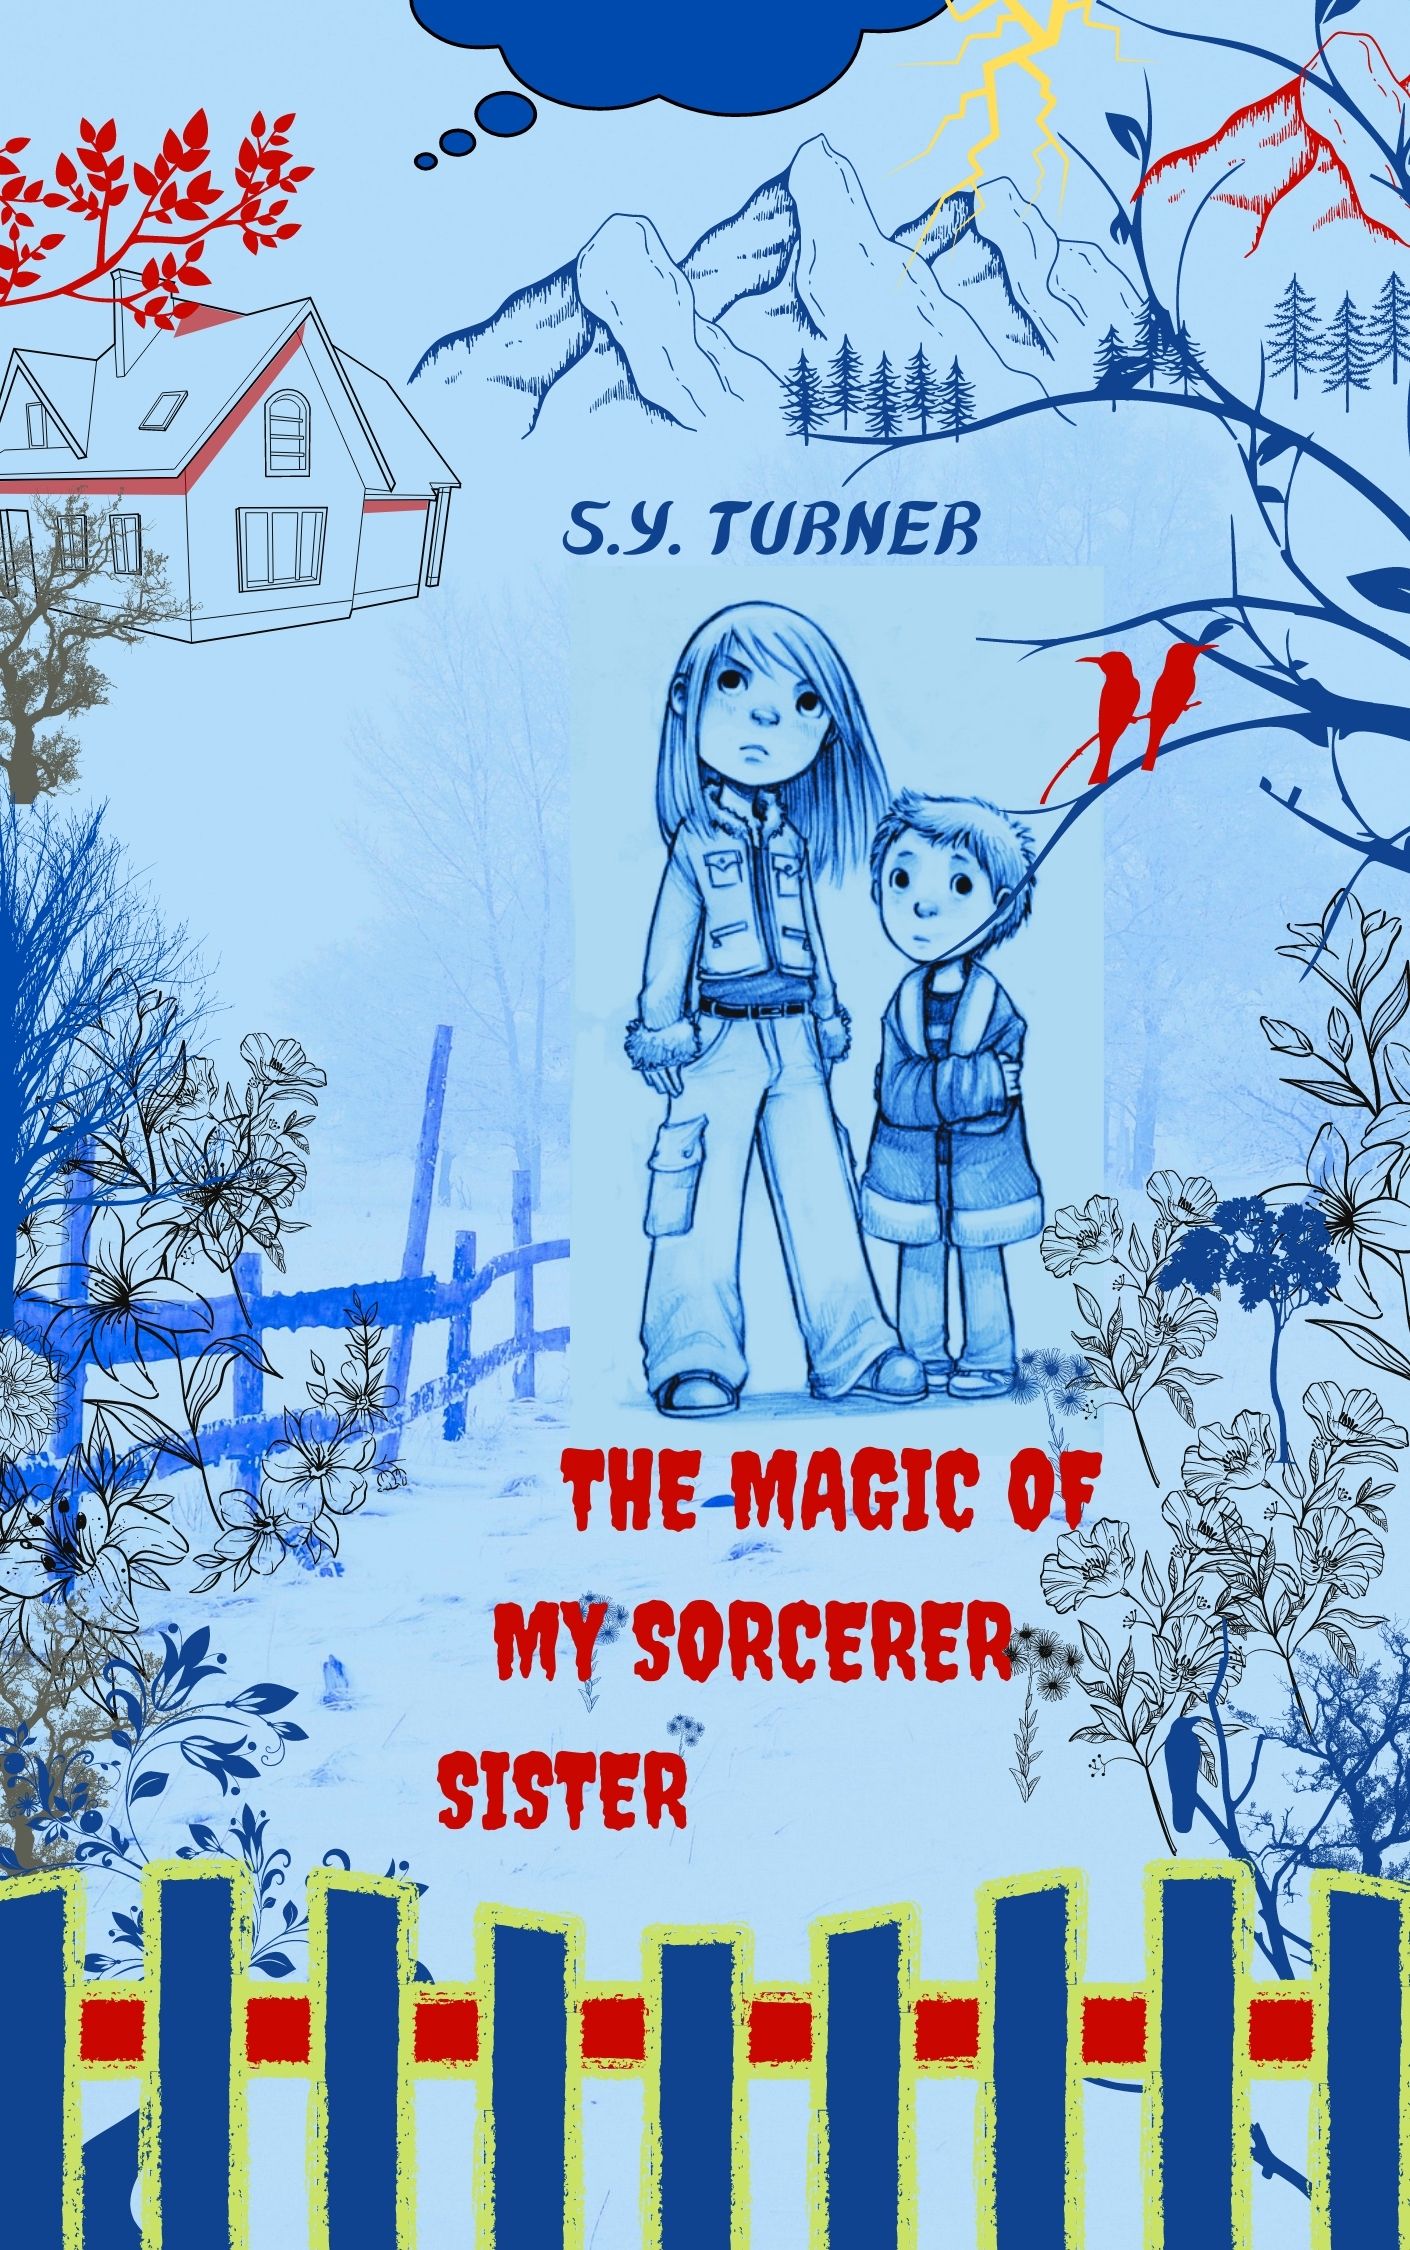 FREE: The Magic of My Sorcerer Sister by S.Y.Turner